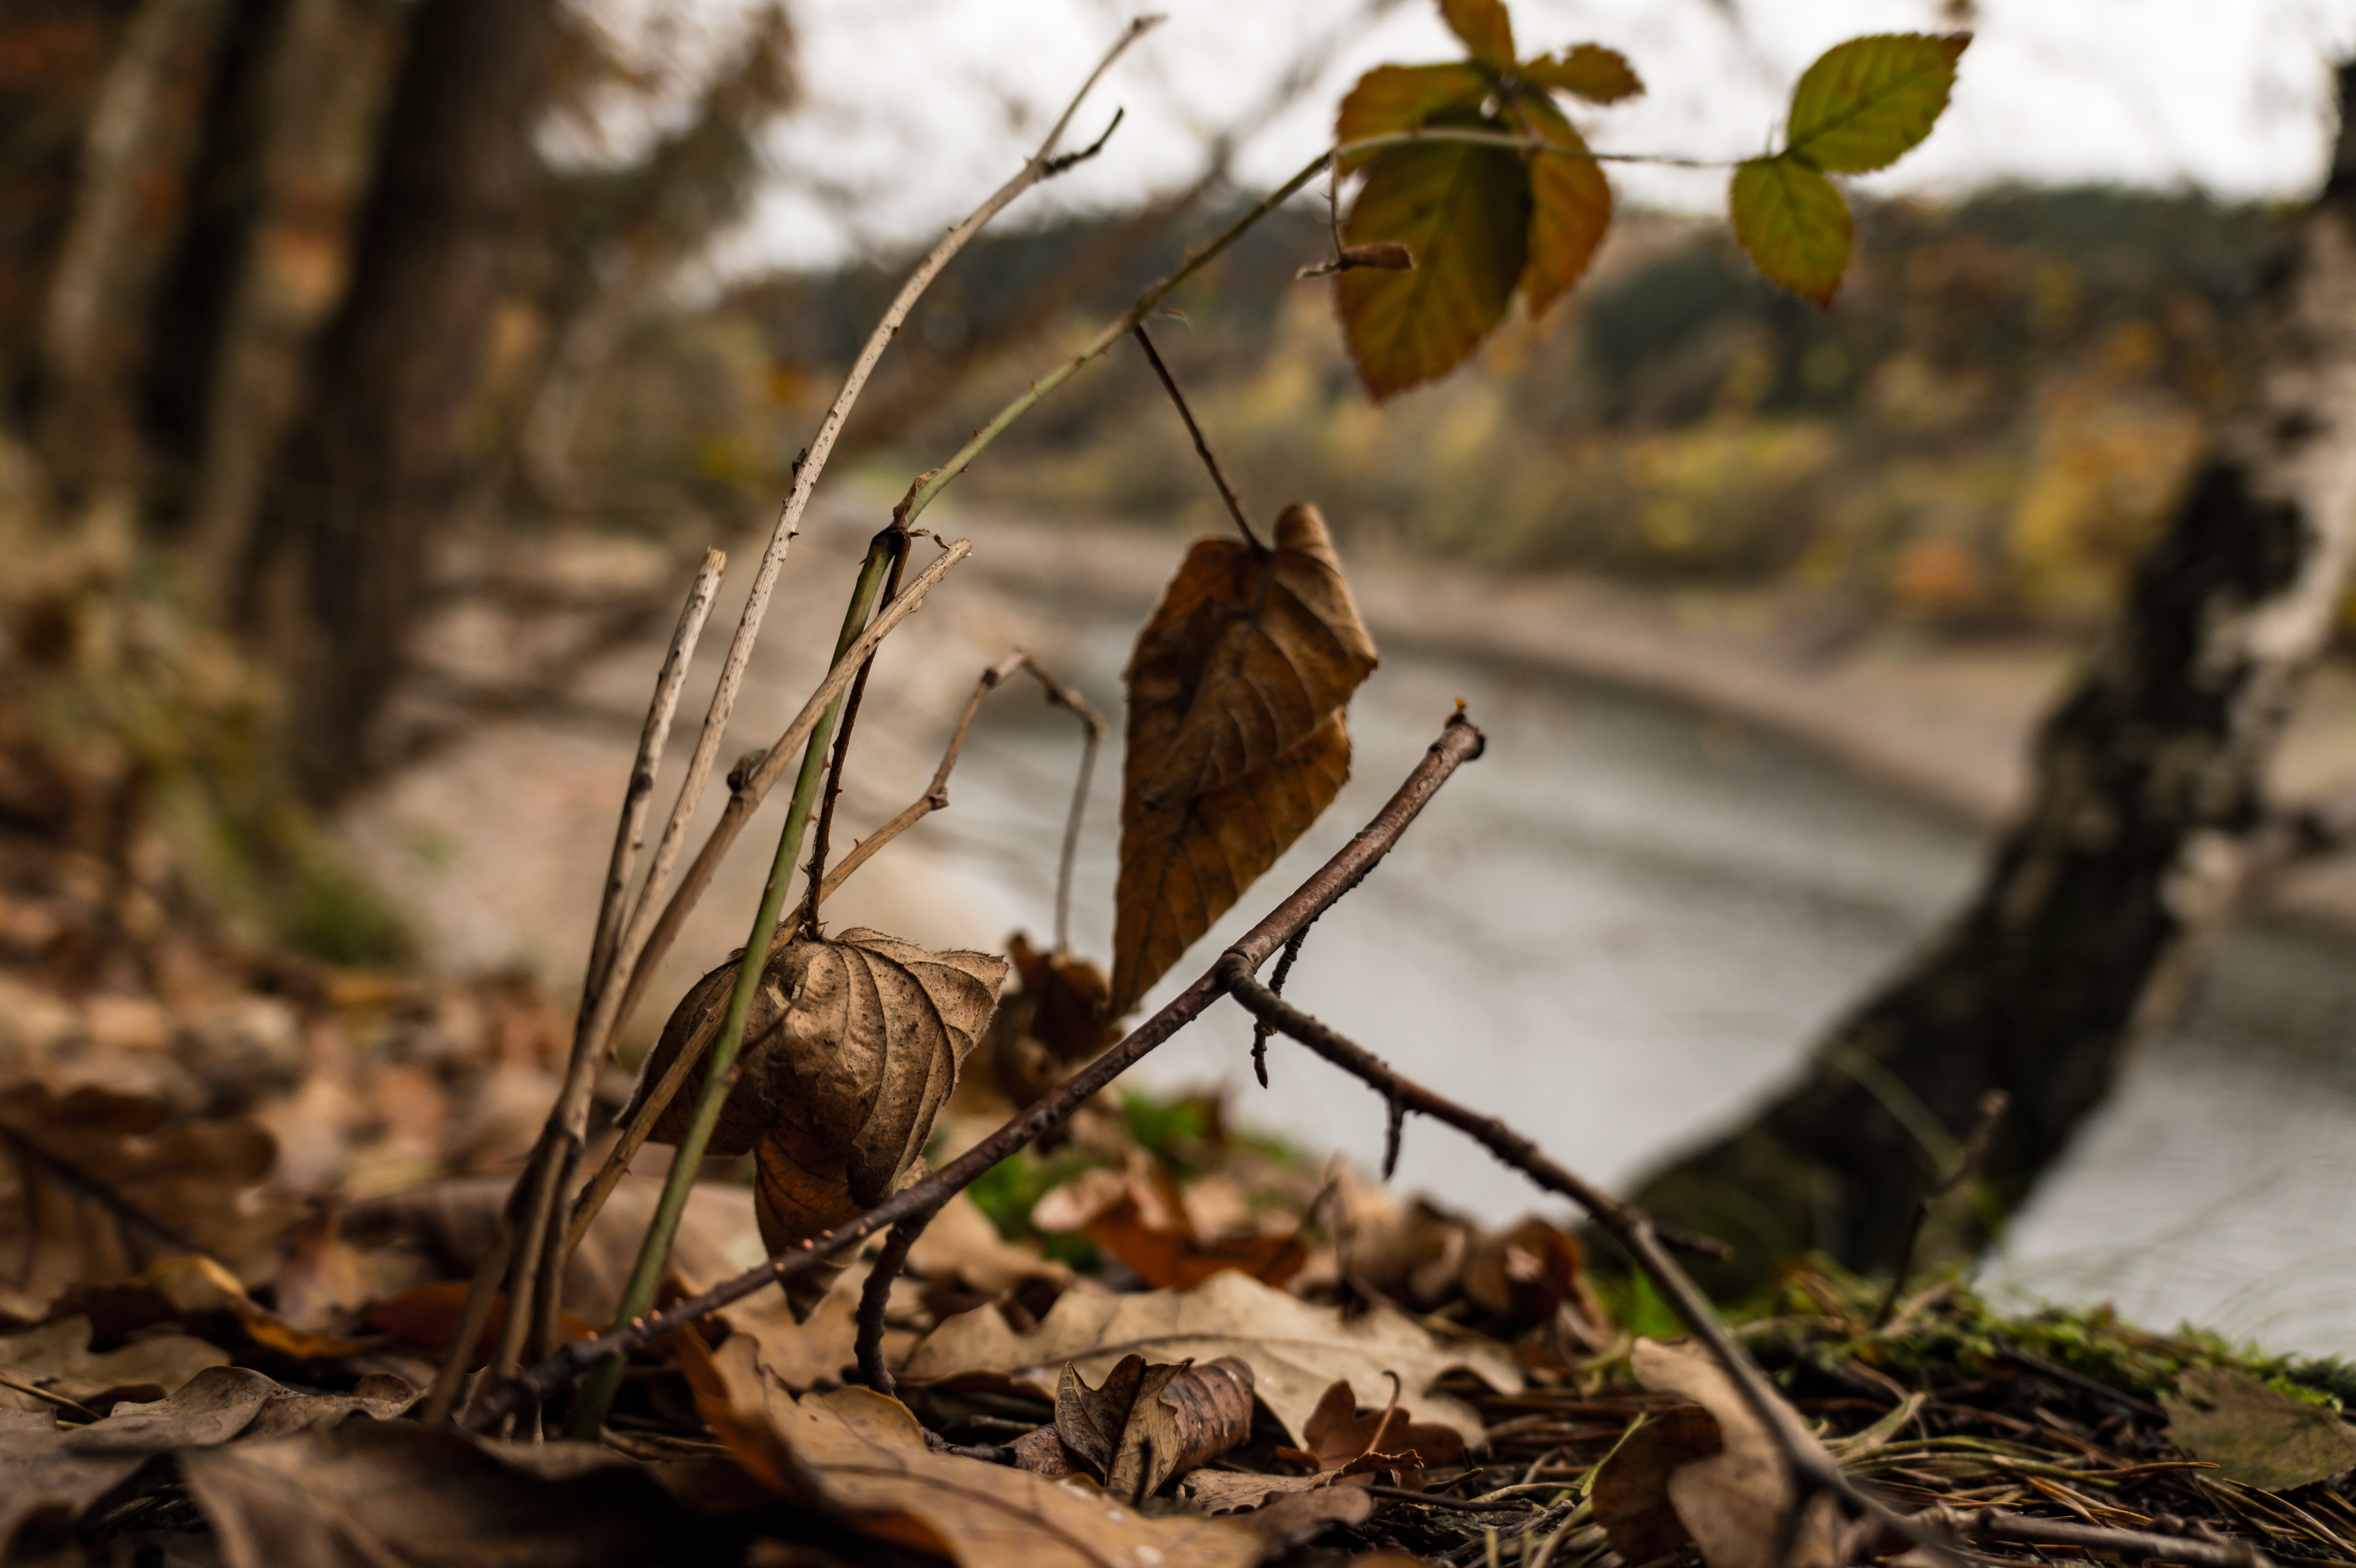 General 5456x3632 plants water leaves depth of field forest fall photoshopped nature oak birch blackberries foliage photography closeup